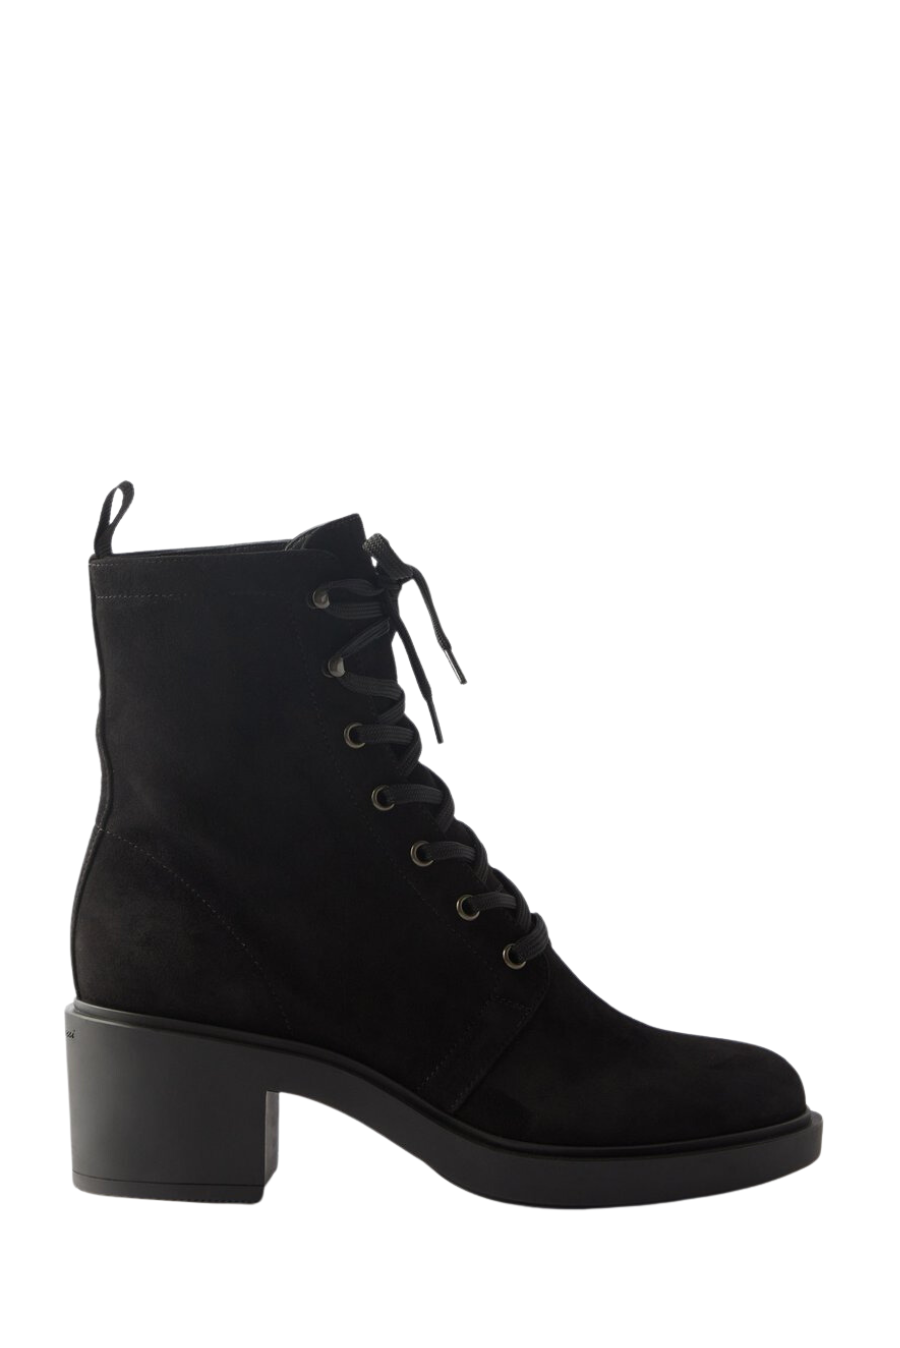 'Foster' Lace Up Boot